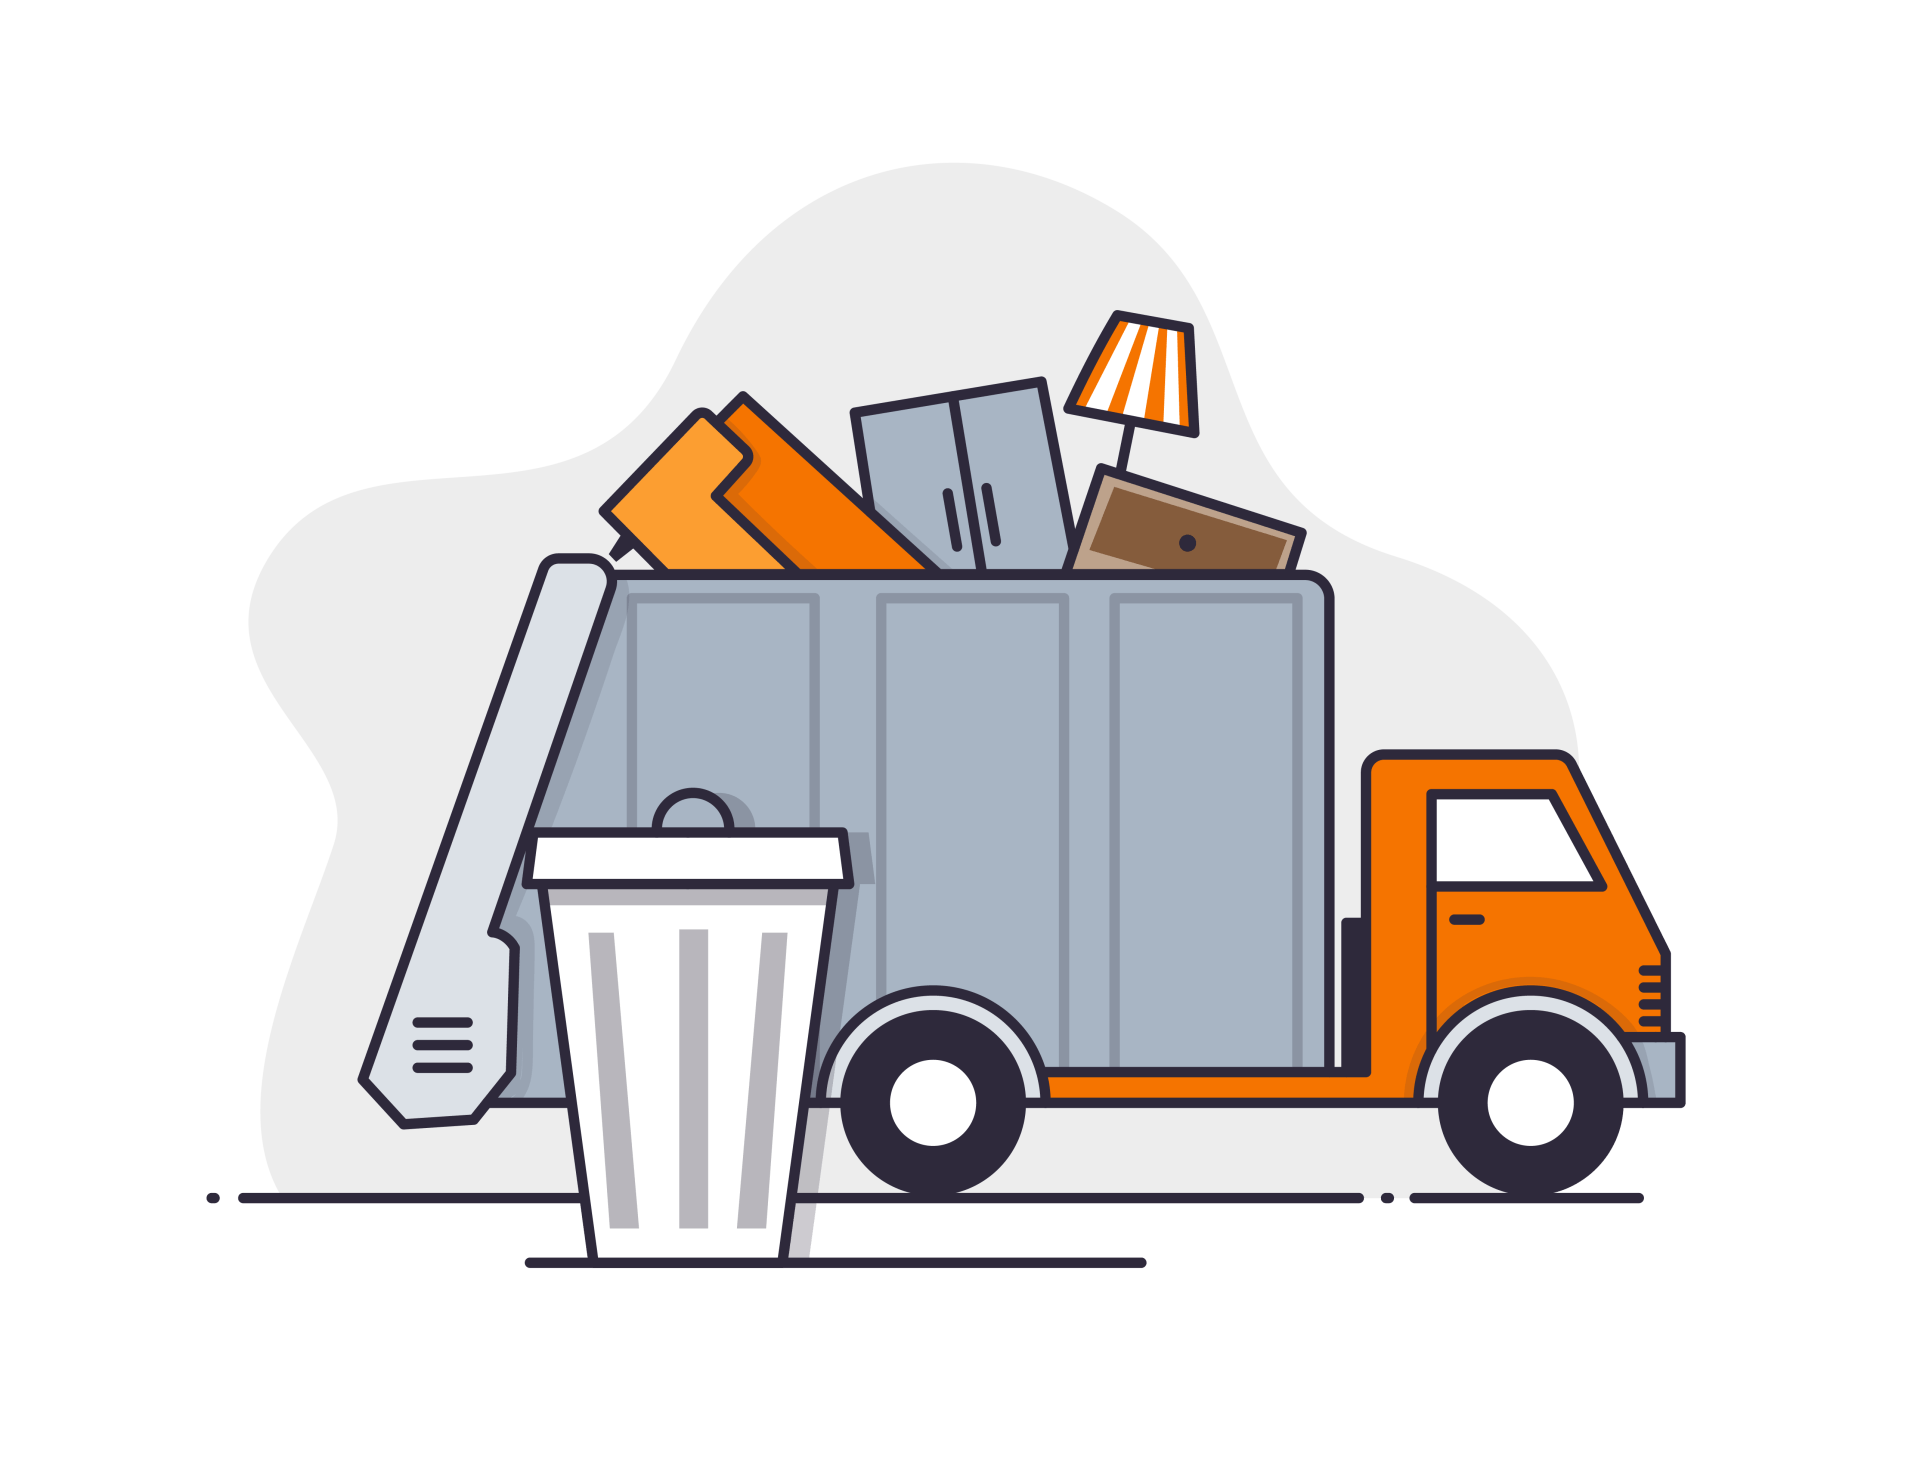 Texas-based Junk Removal Services